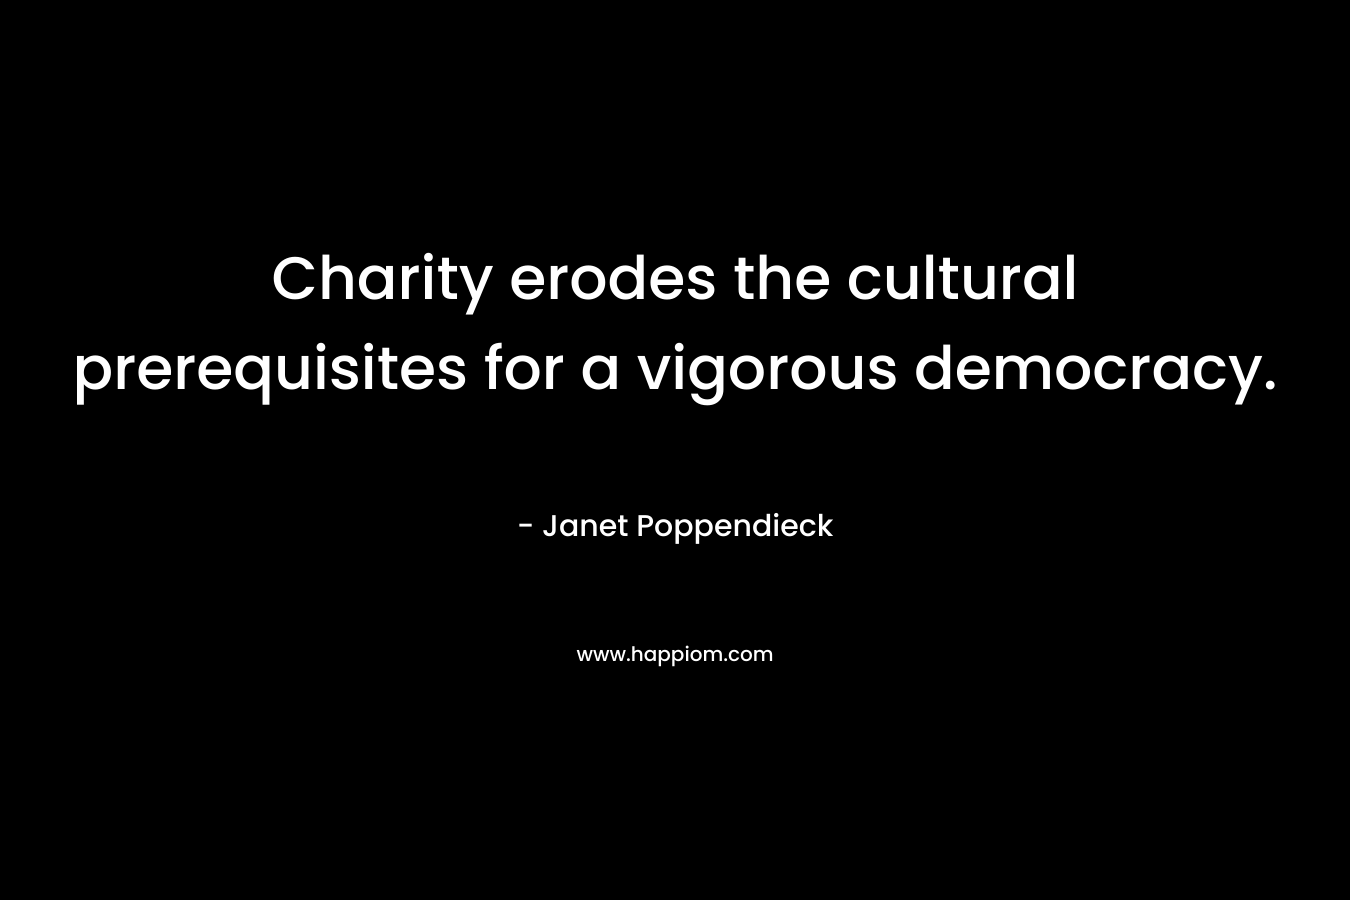 Charity erodes the cultural prerequisites for a vigorous democracy.